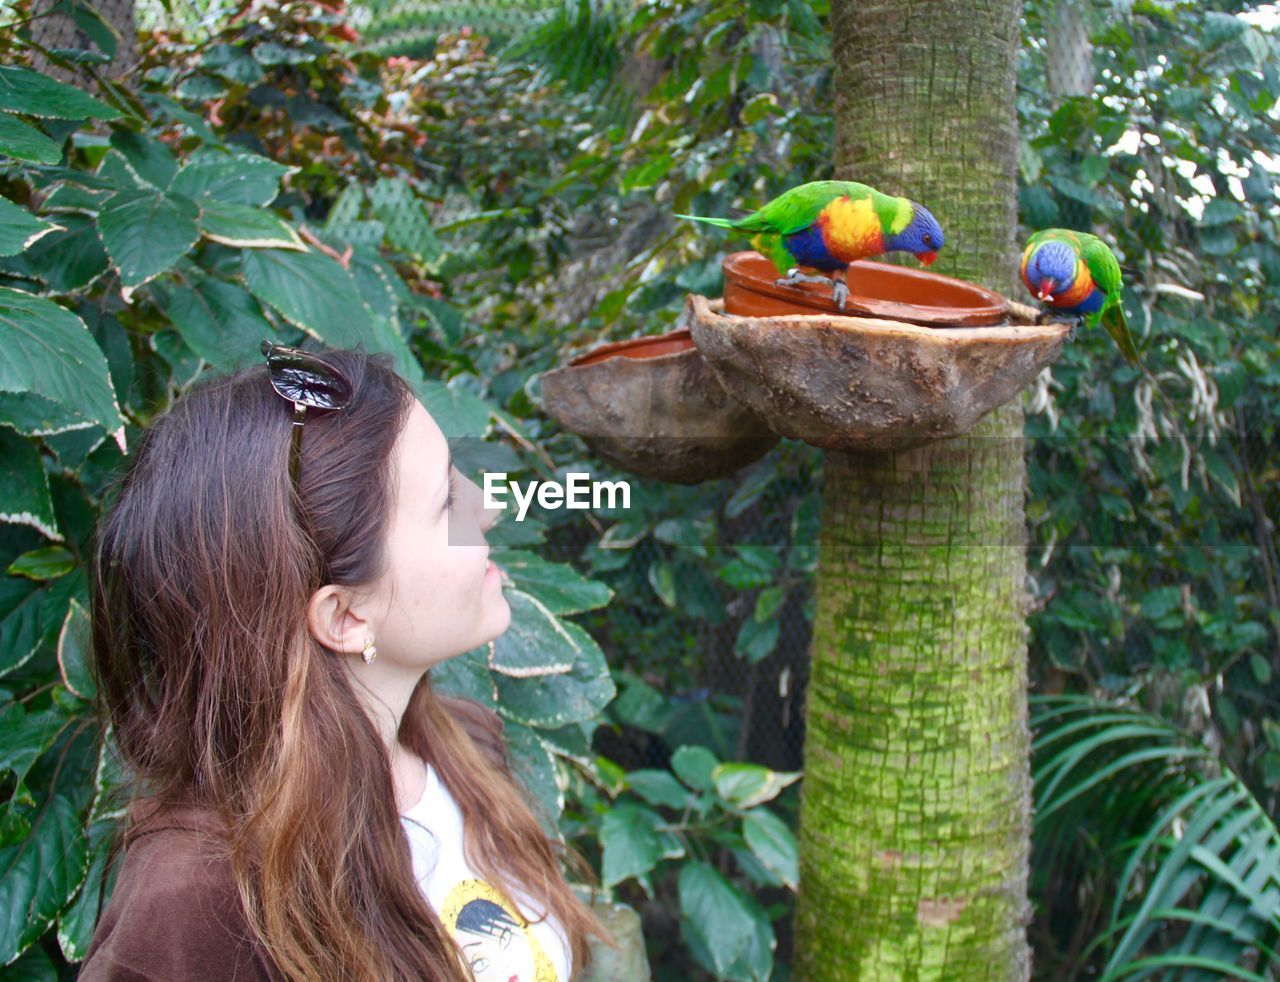 Smiling young woman looking at rainbow lorikeets on bird feeder